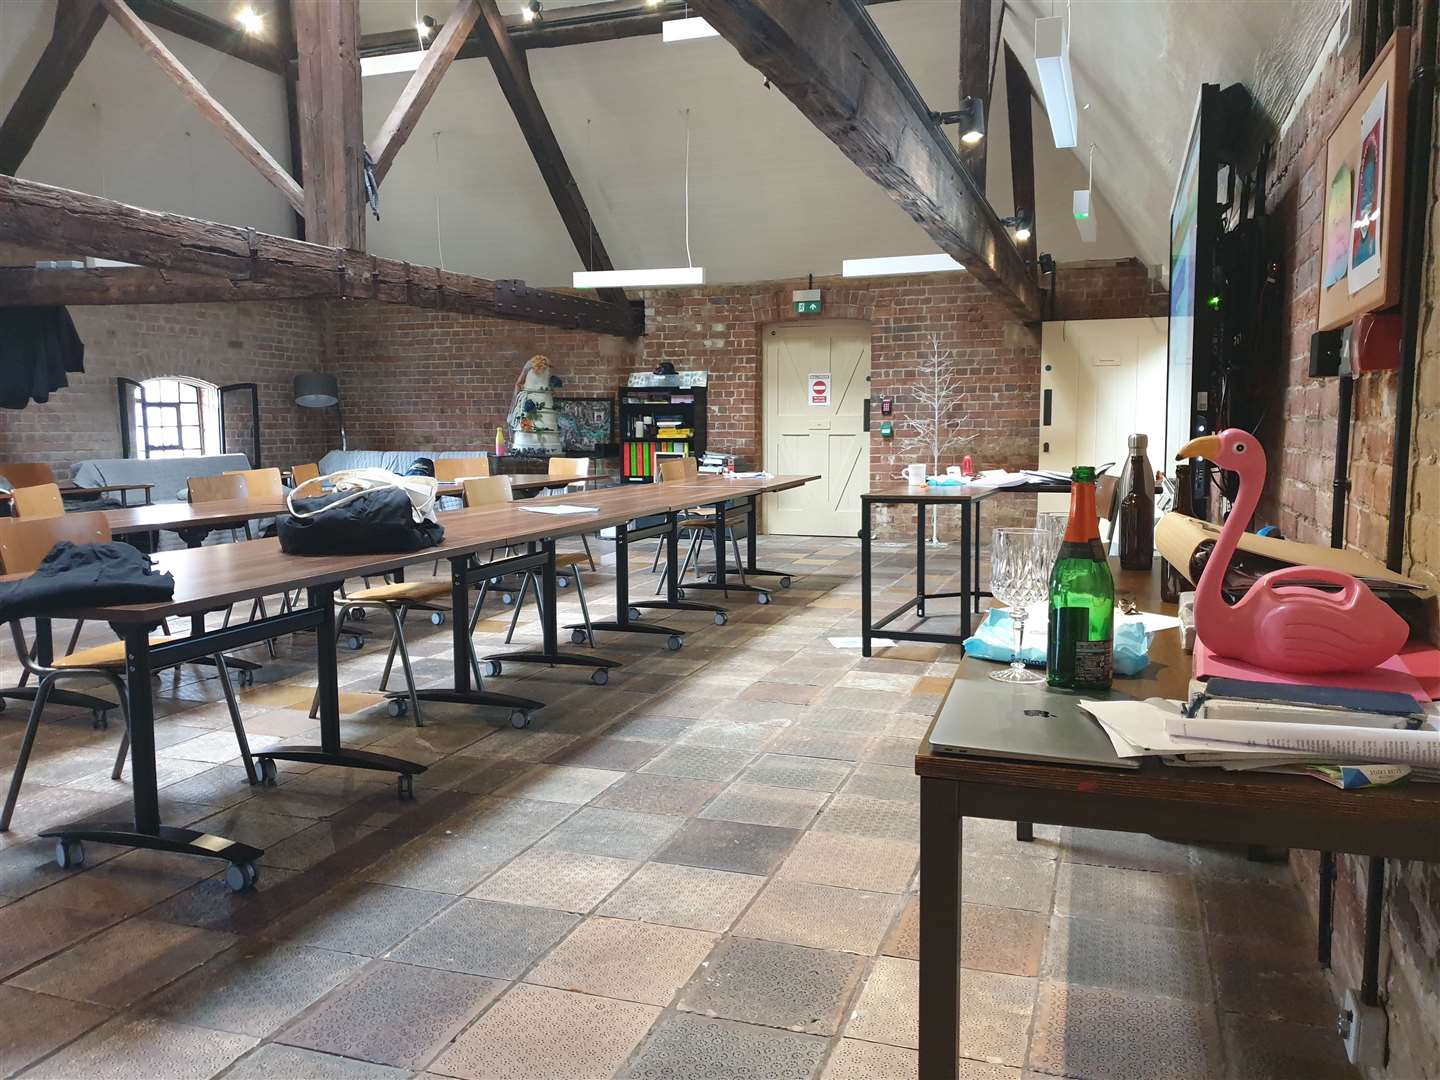 A King's School classroom inside the newly renovated Malthouse in Canterbury